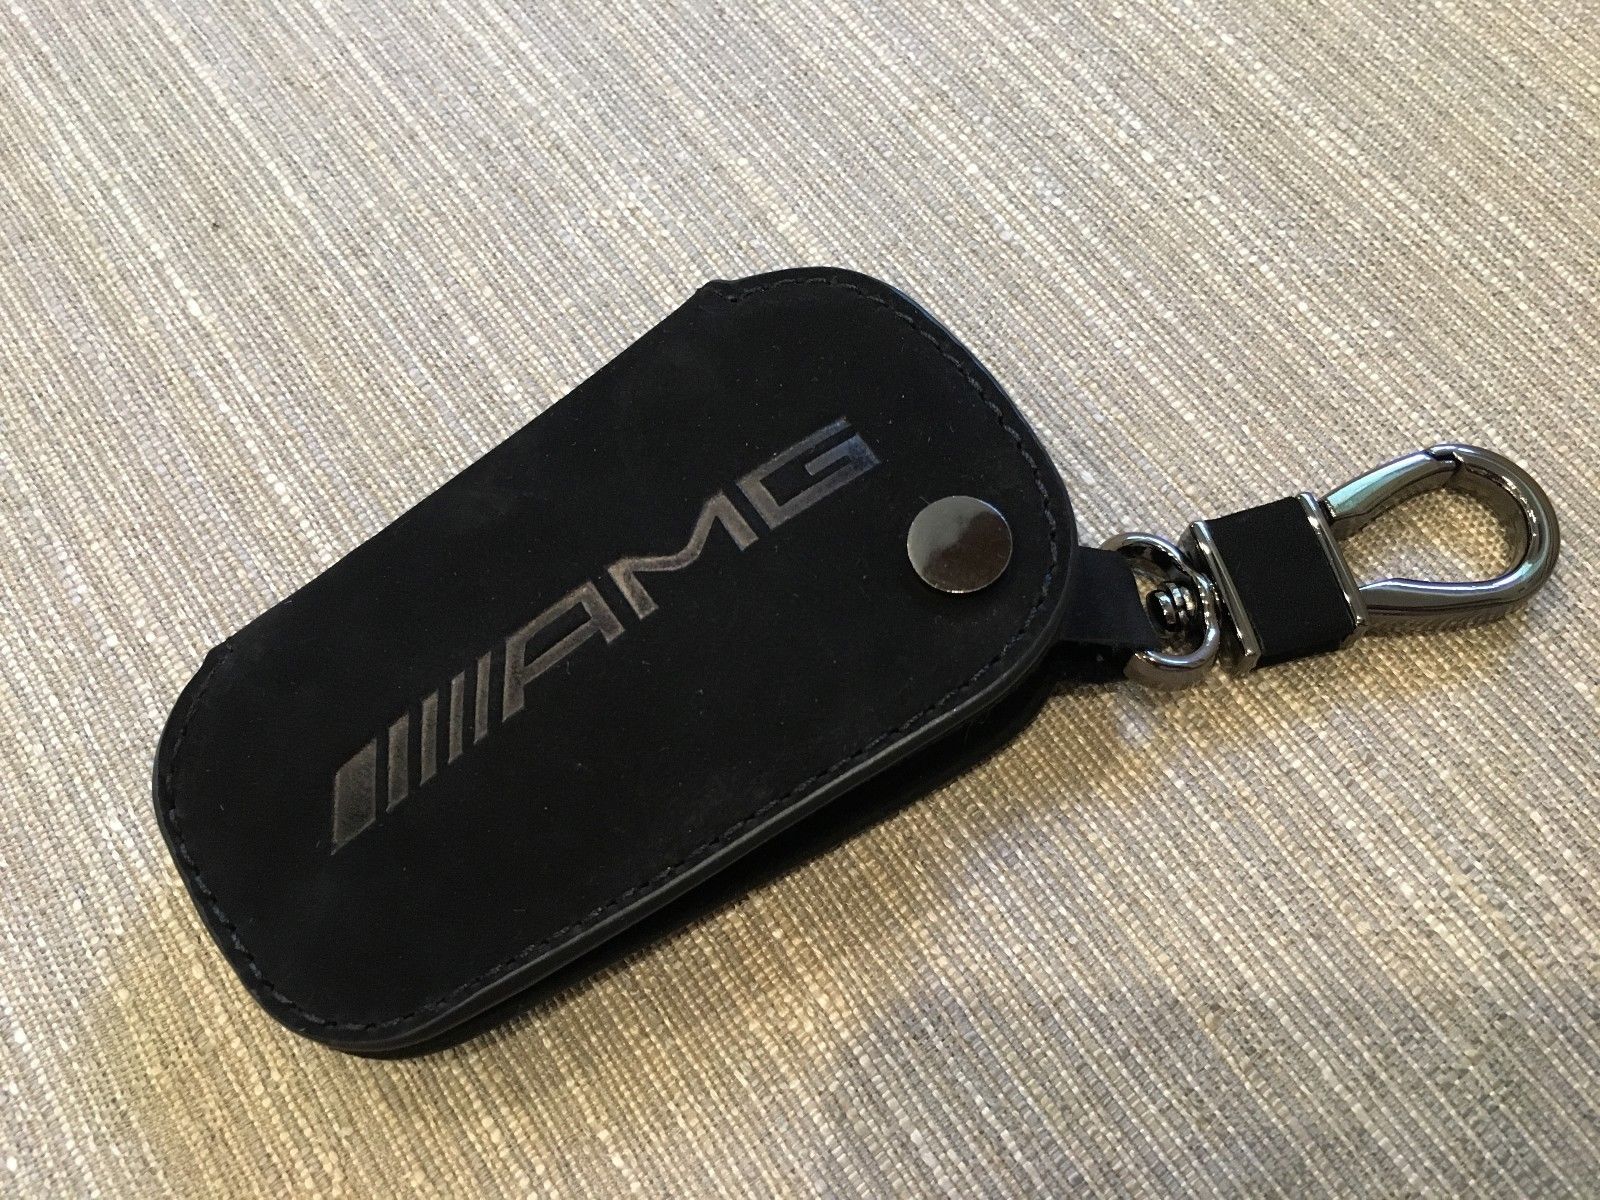 Huis Verkeerd Mineraalwater Mercedes AMG Black Suede Leather Key Fob Holder Pouch C63s C43 CLA45 GLA45  2017 2018 is in stock and for sale - 24CarShop.com